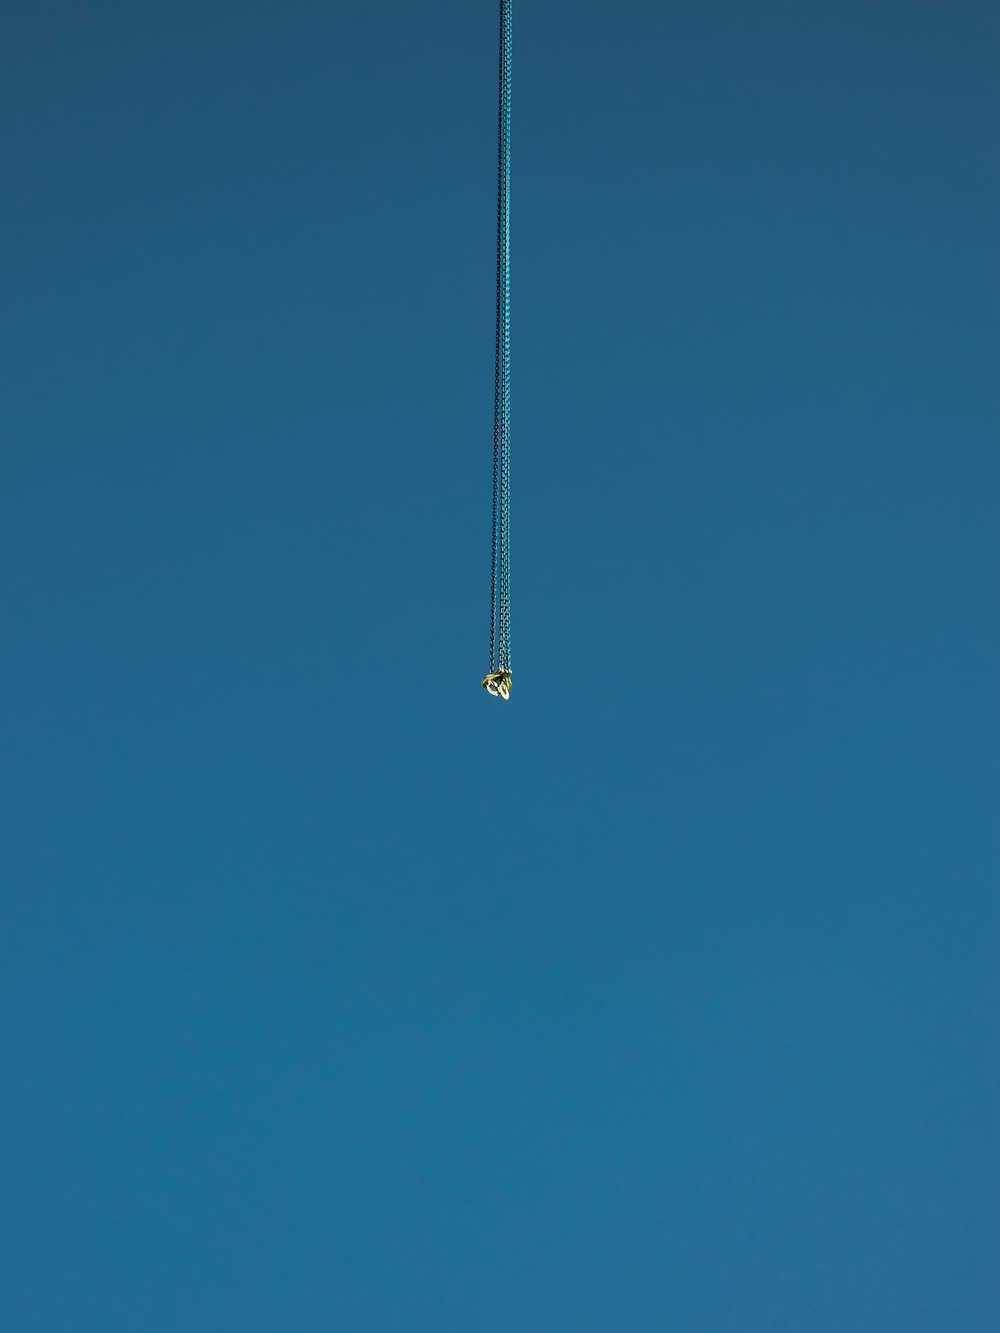 black and silver fishing rod under blue sky during daytime